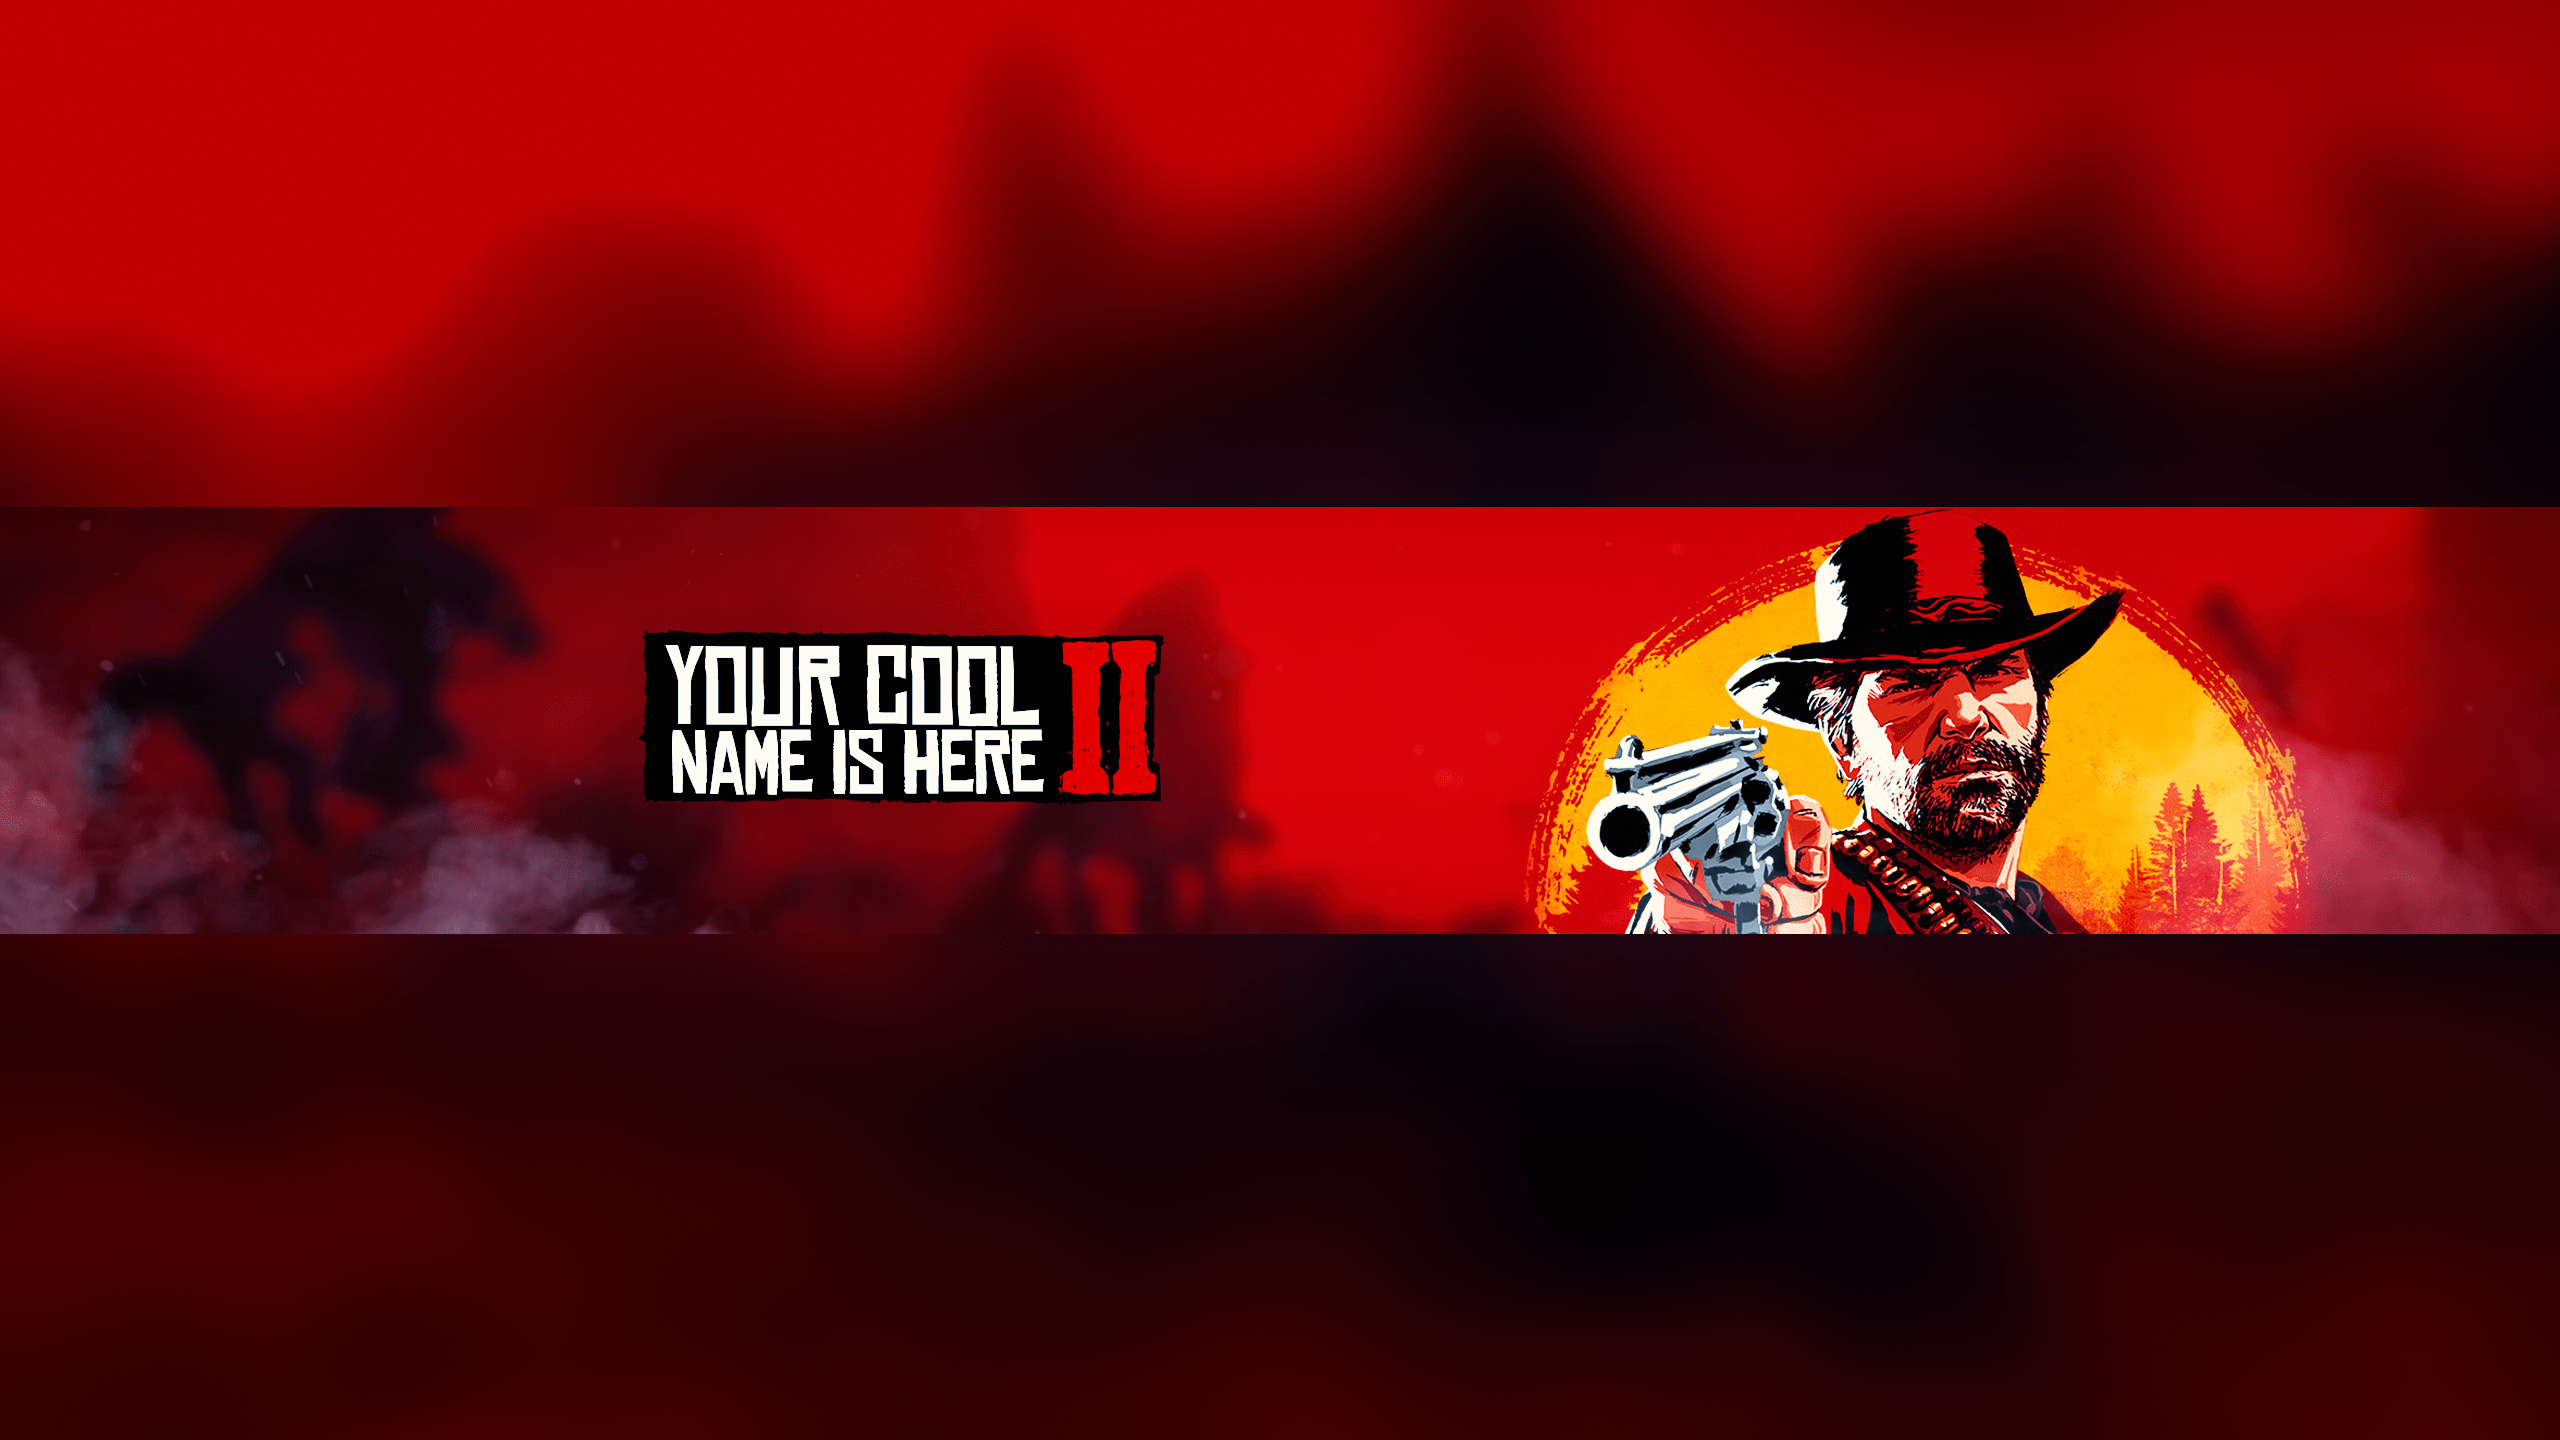 Red Dead Redemption 2 Banner - Red Dead 2 Banner Youtube - HD Wallpaper 